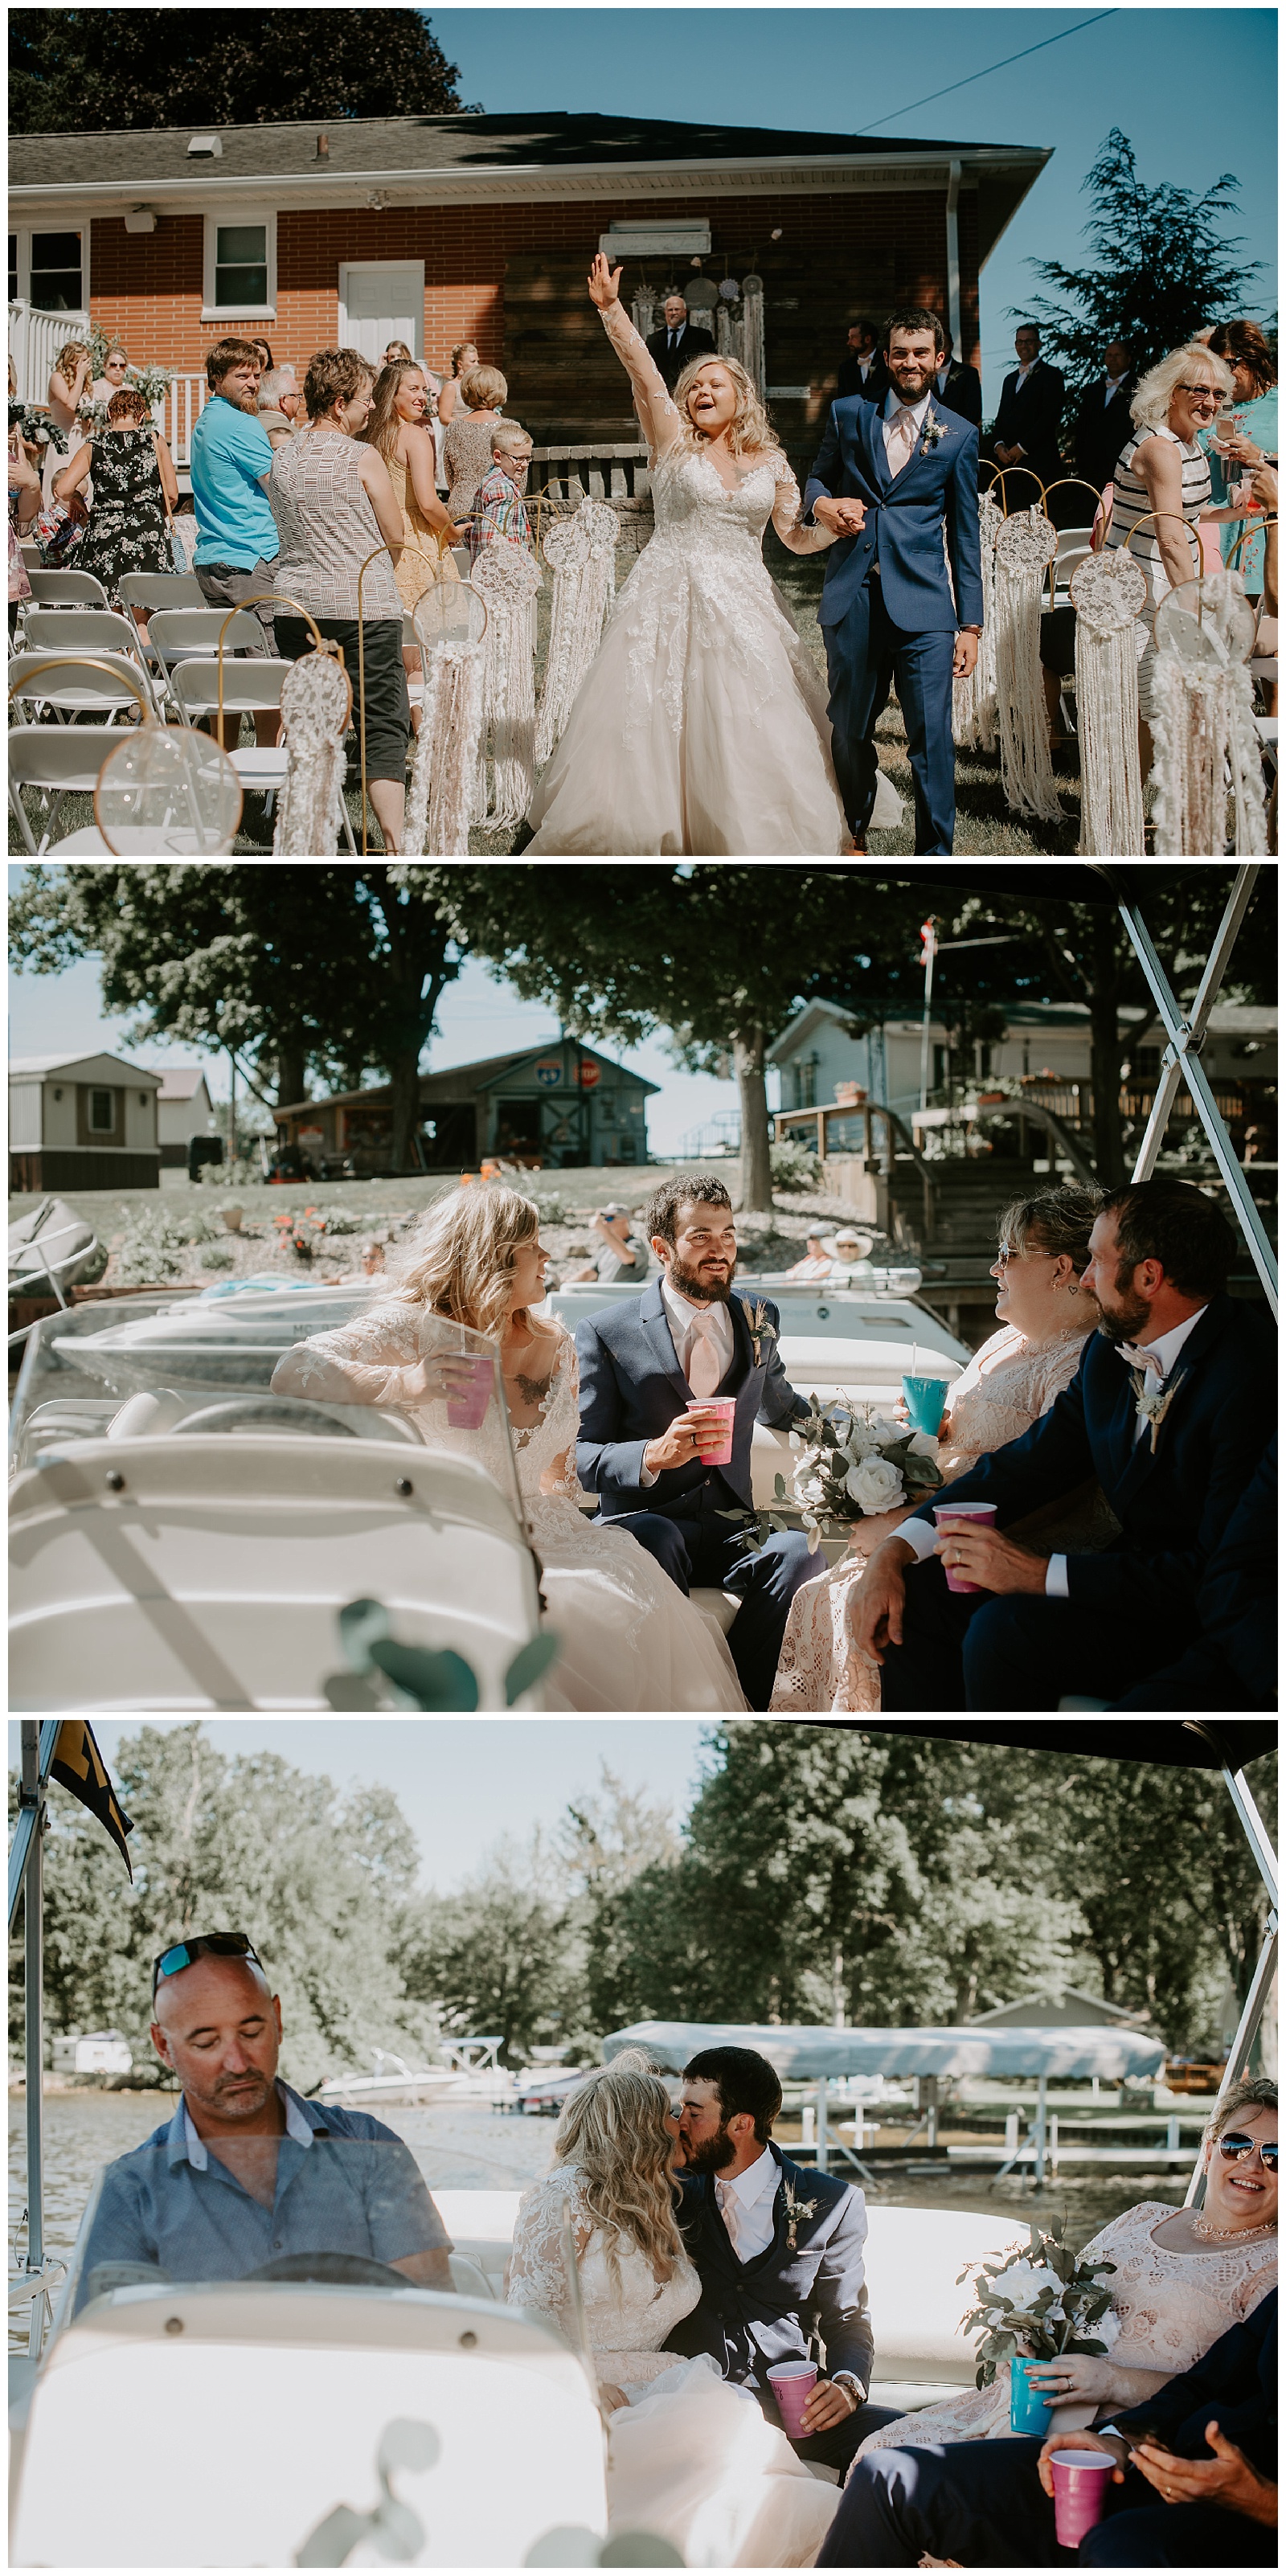 Liv Lyszyk Photography Weddings and Elopements in Grand Rapids MI Michigan Wedding Photographer